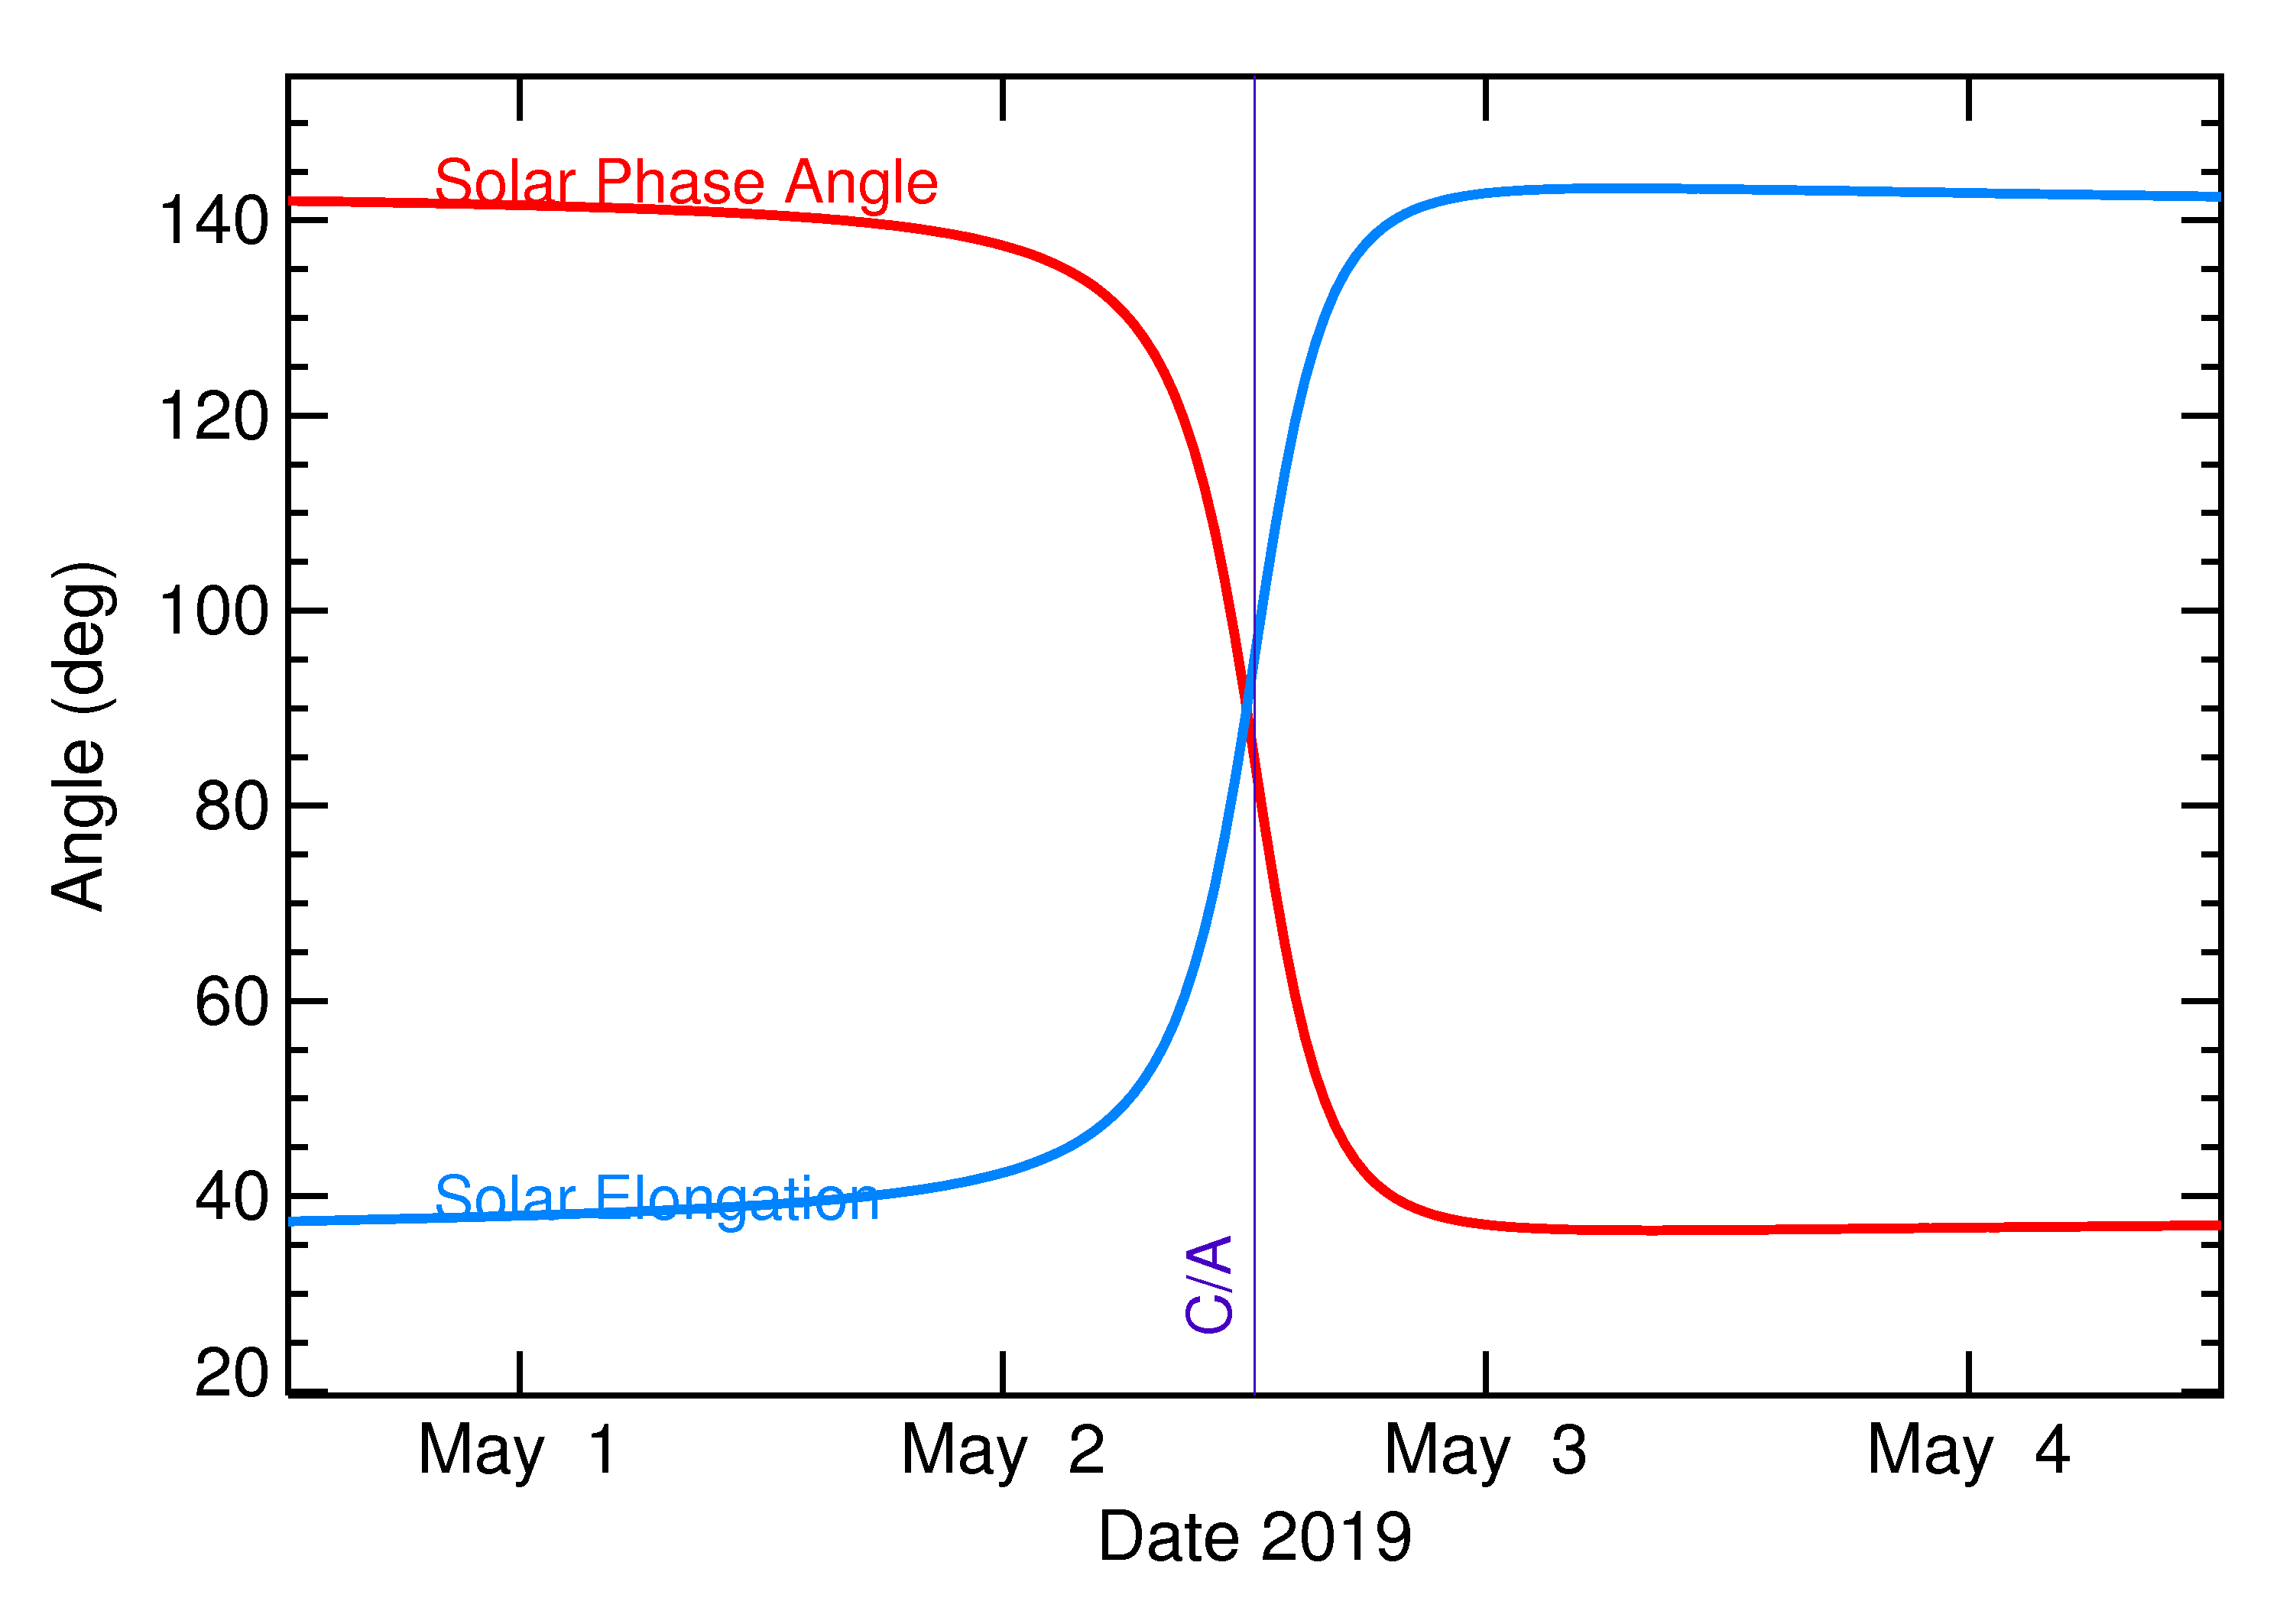 Solar Elongation and Solar Phase Angle of 2019 JX1 in the days around closest approach